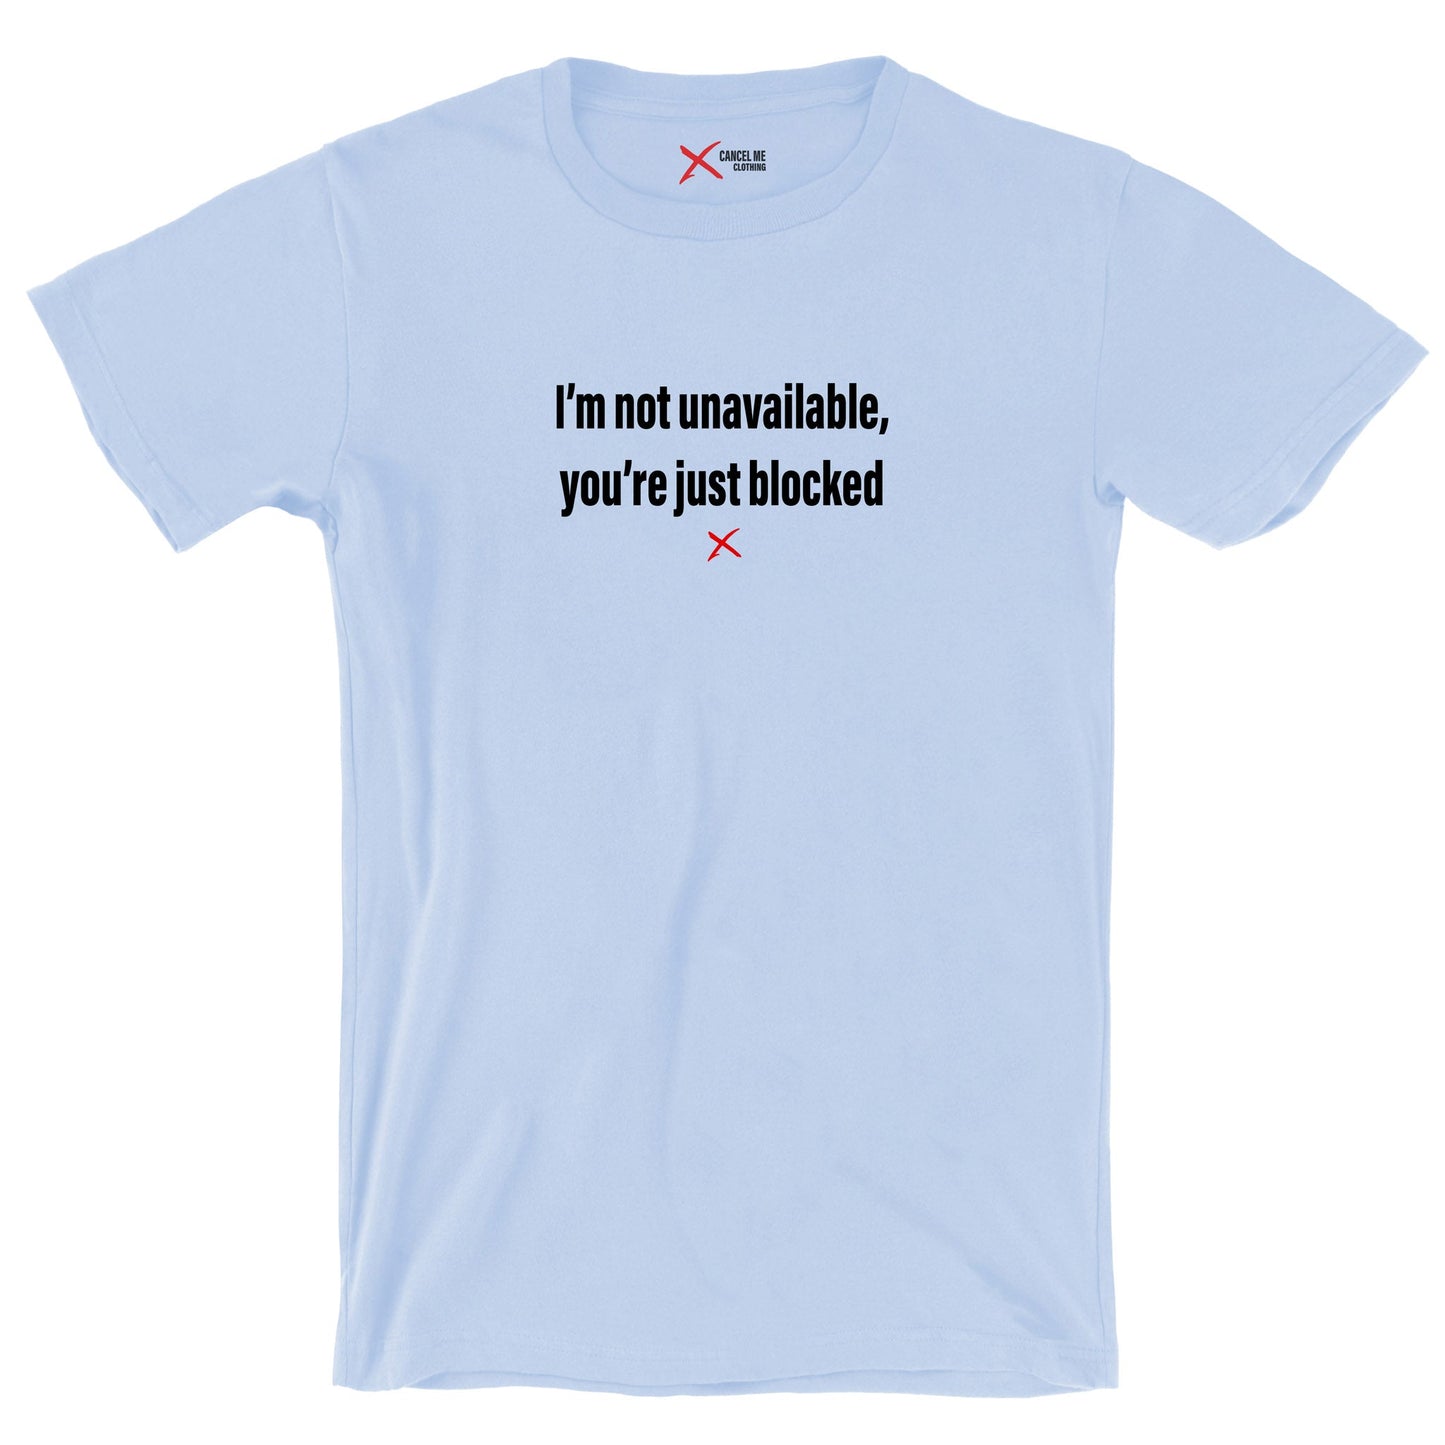 I'm not unavailable, you're just blocked - Shirt